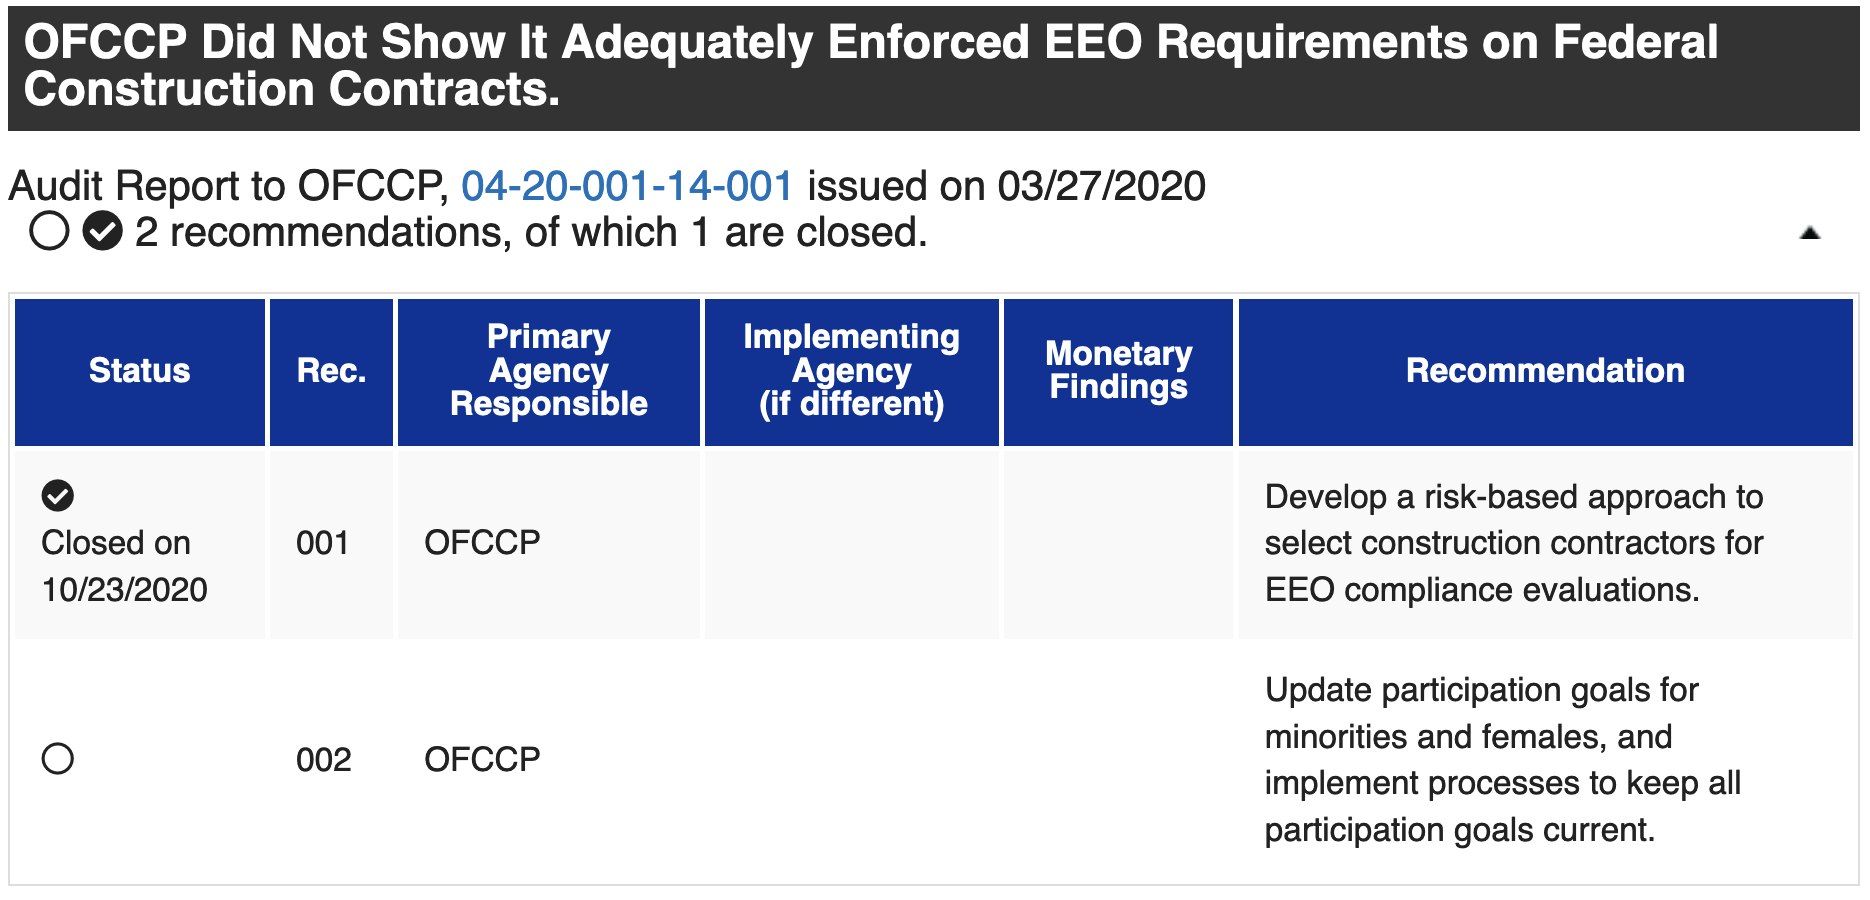 OFCCP Did Not Show It Adequately Enforced EEO Requirements on Federal Construction Contracts | Audit Report to the OFCCP